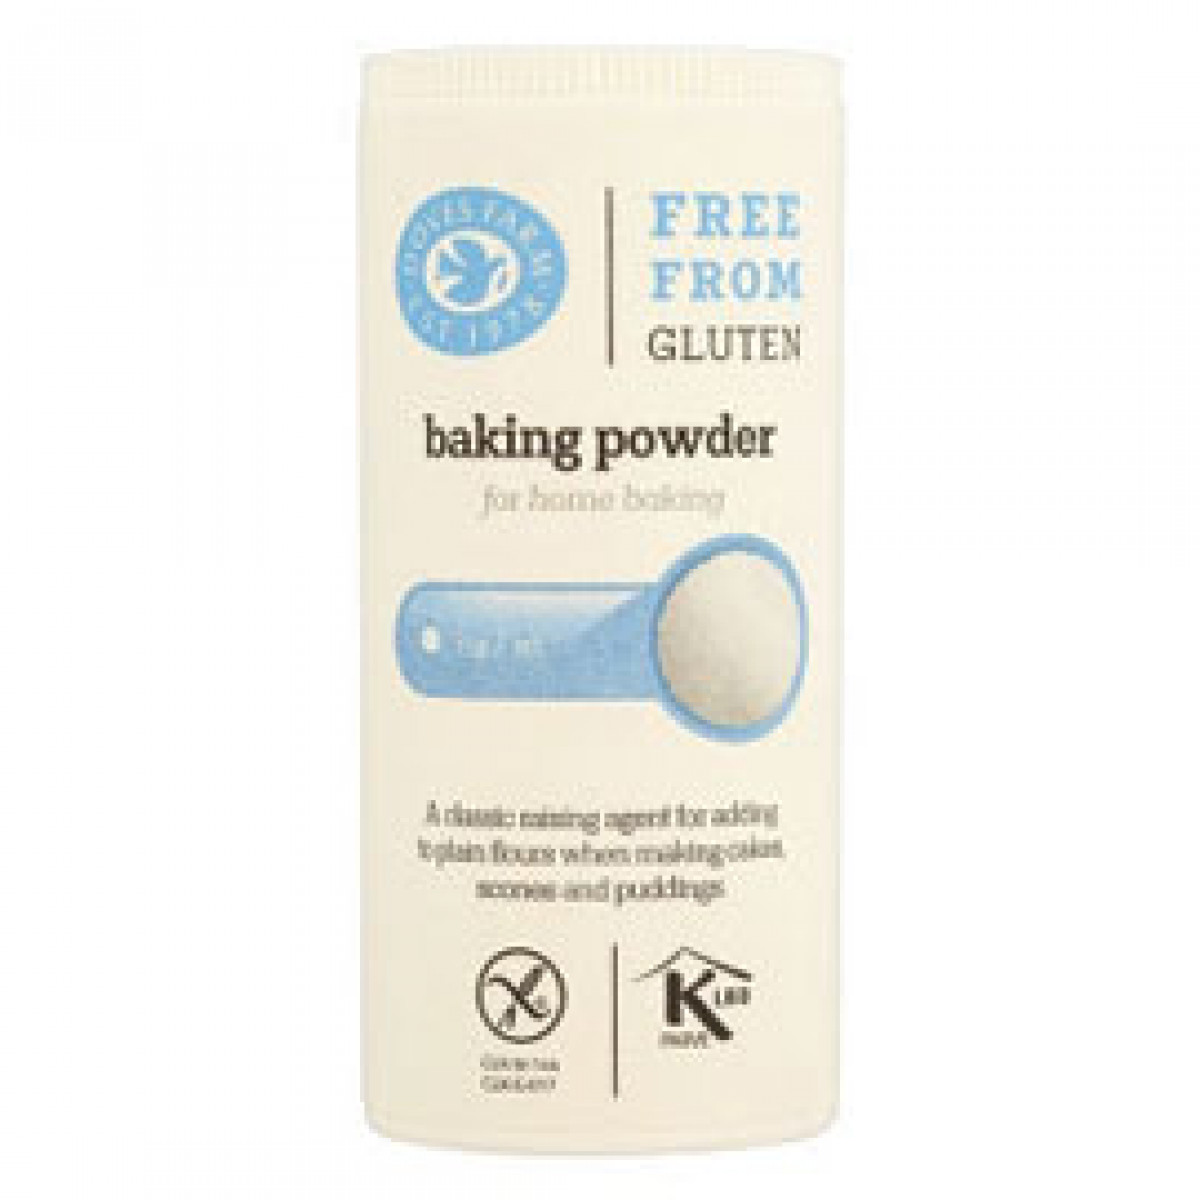 Product picture for Baking Powder